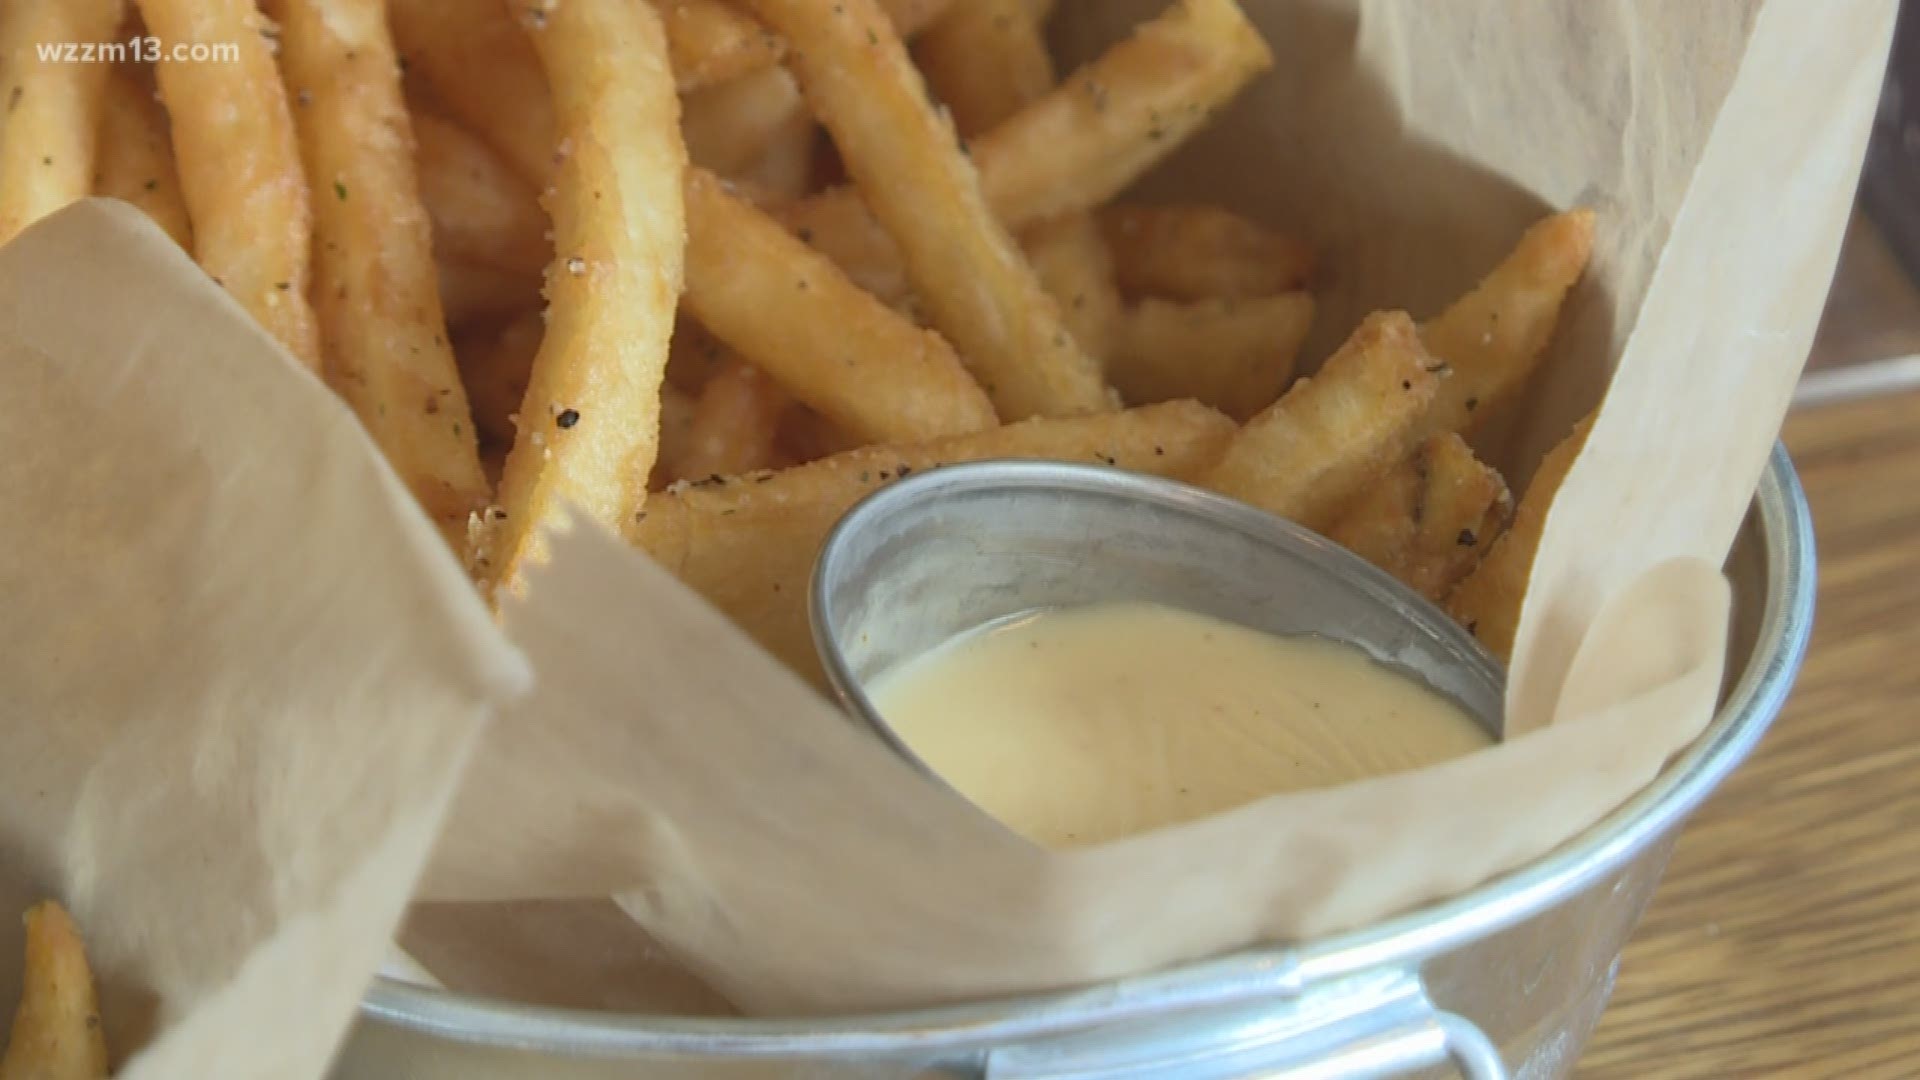 HopCat announces new name for famous fries